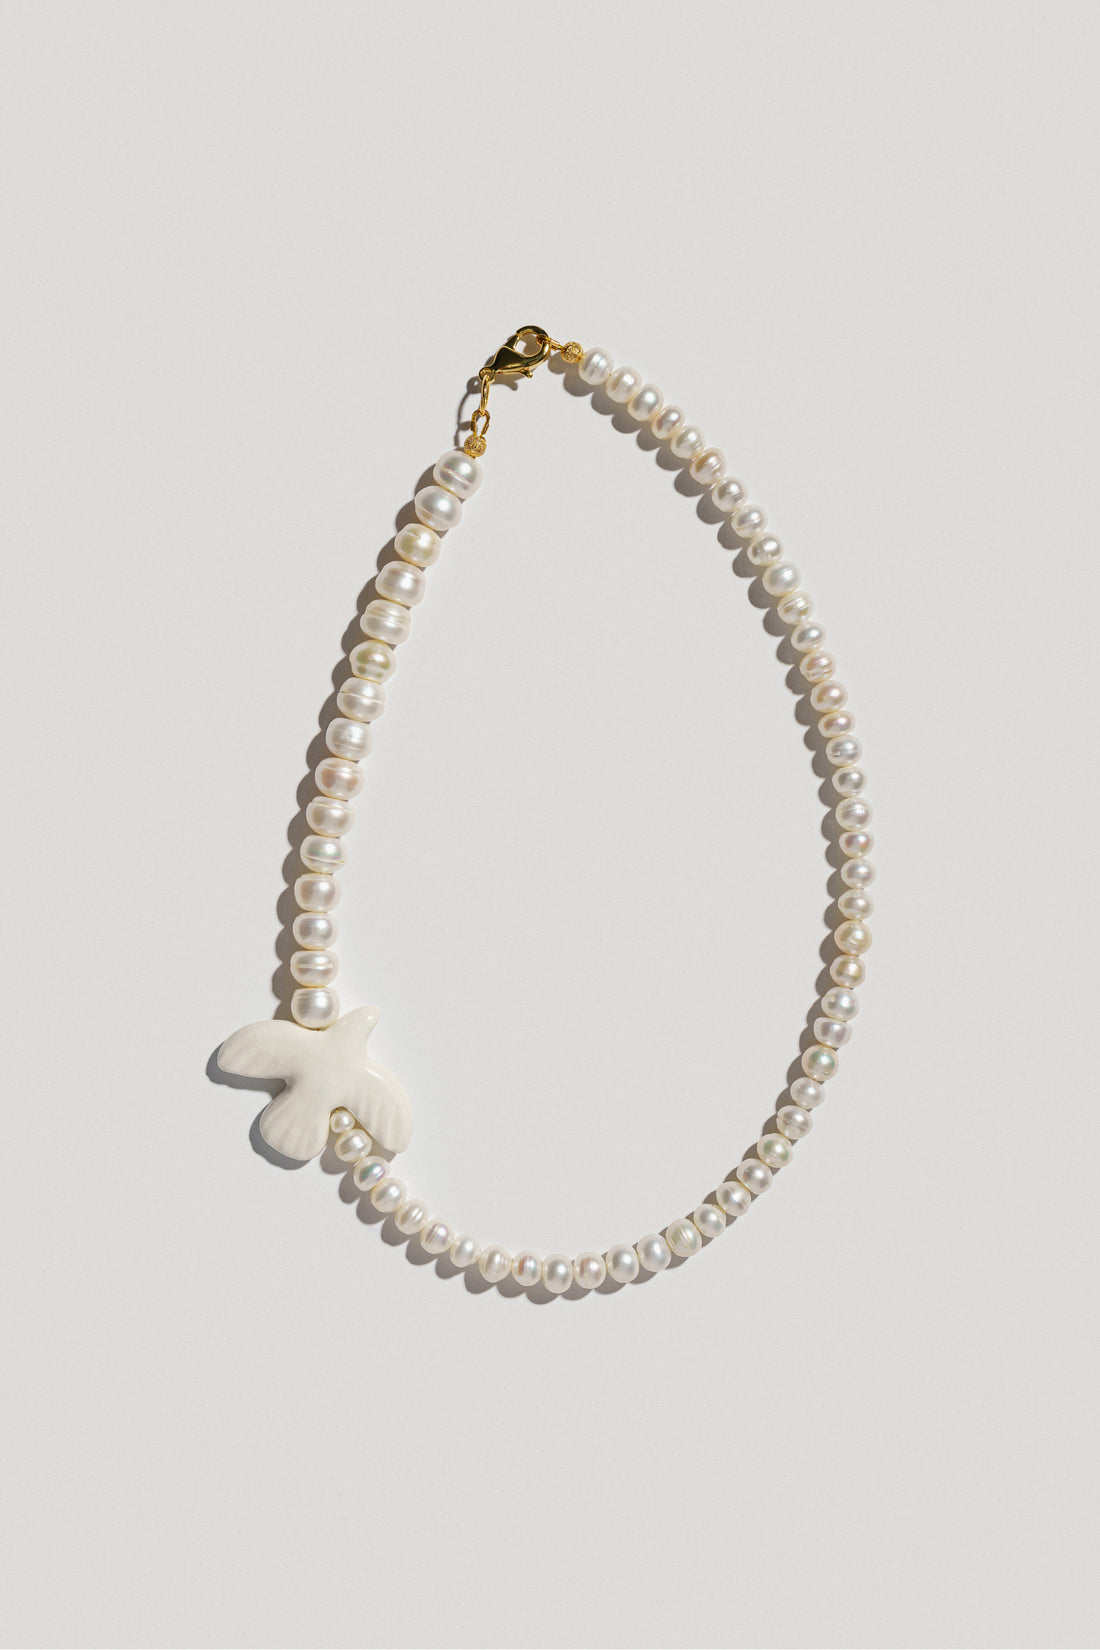 Myrni necklace with double-sized pearls and a porcelain bird